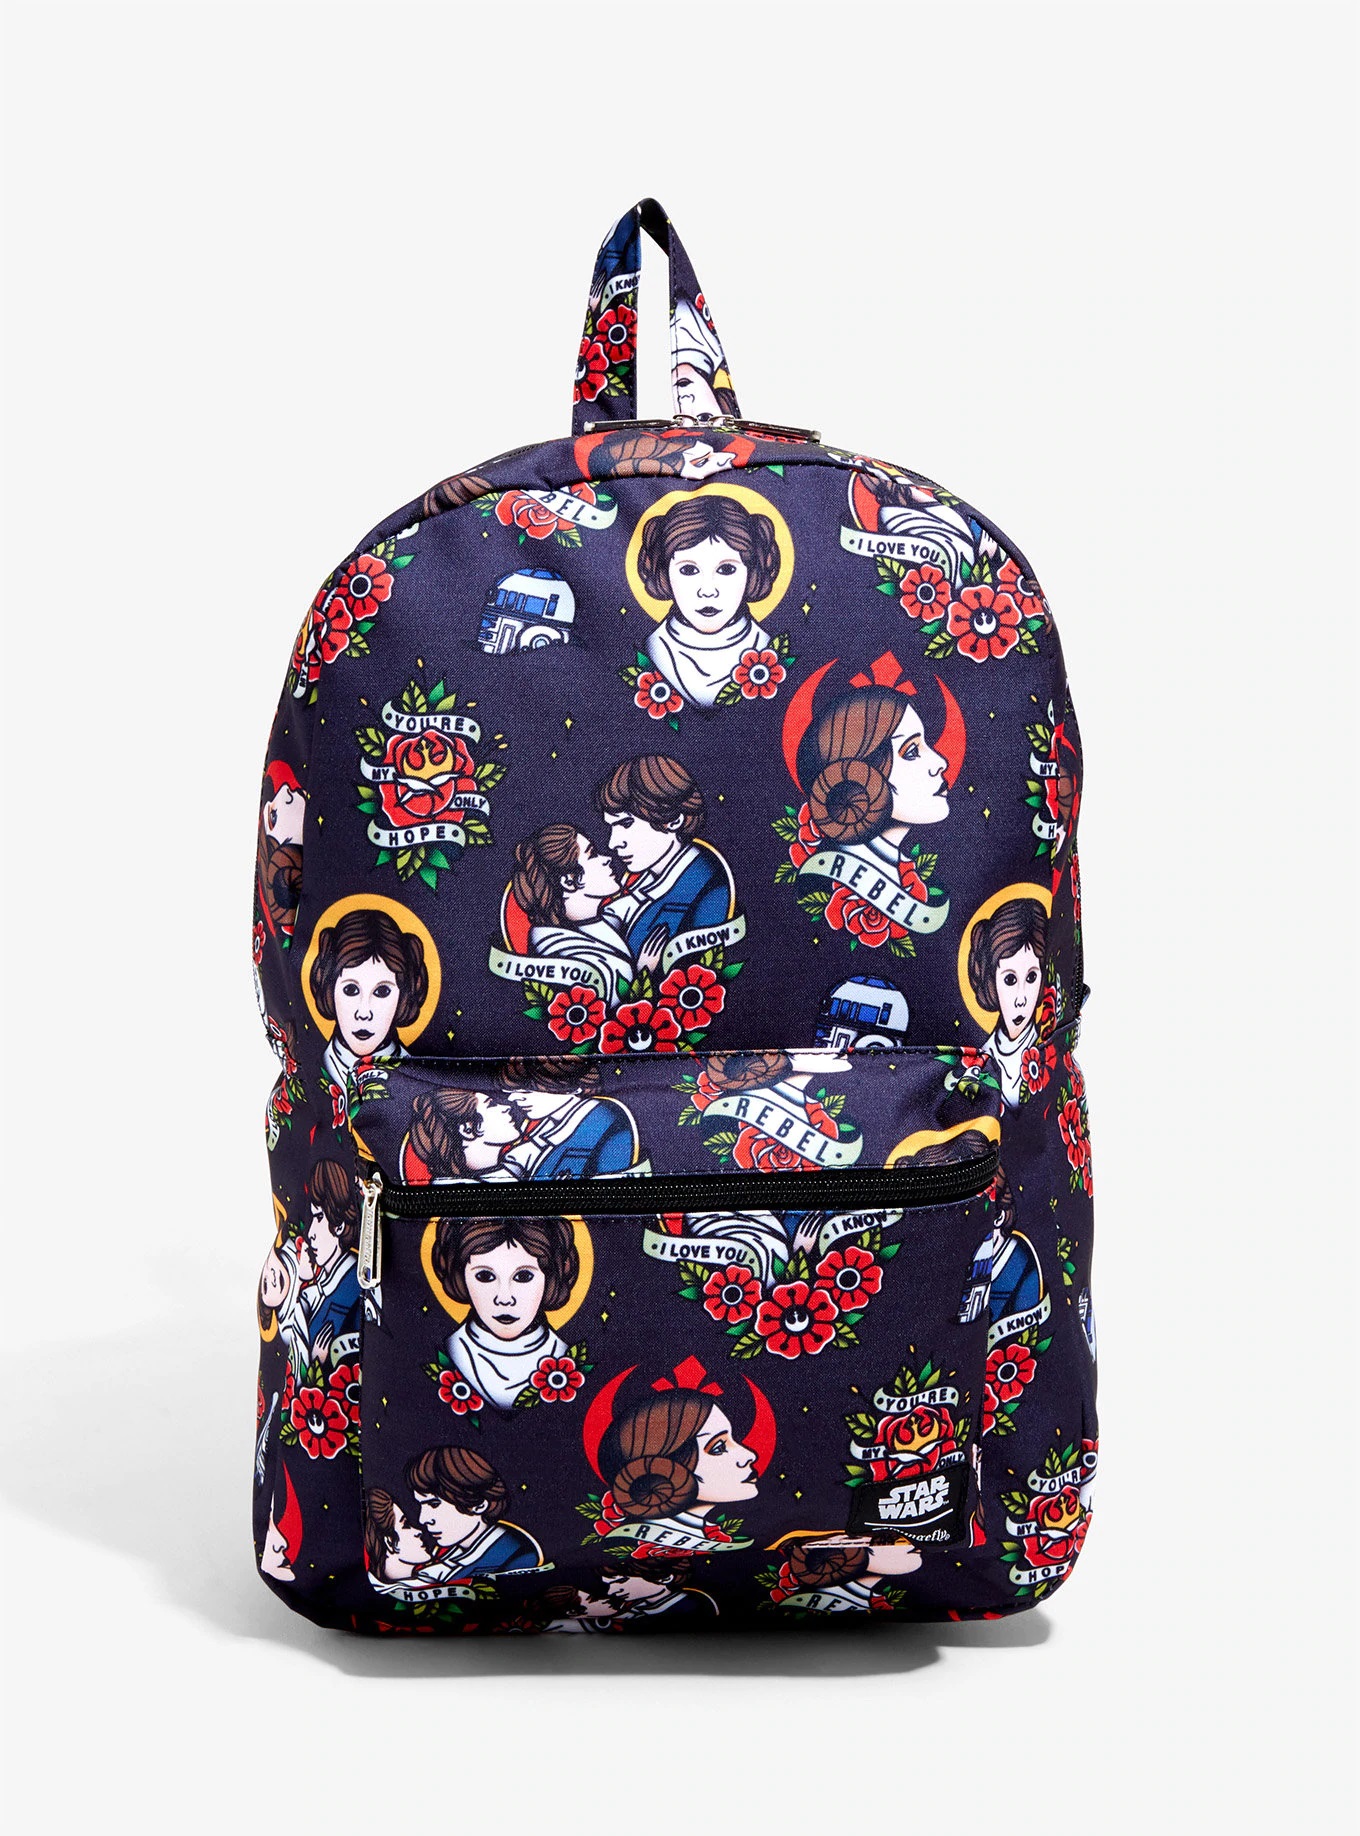 Loungefly x Star Wars Princess Leia and Han Solo Tattoo Print Backpack at Hot Topic